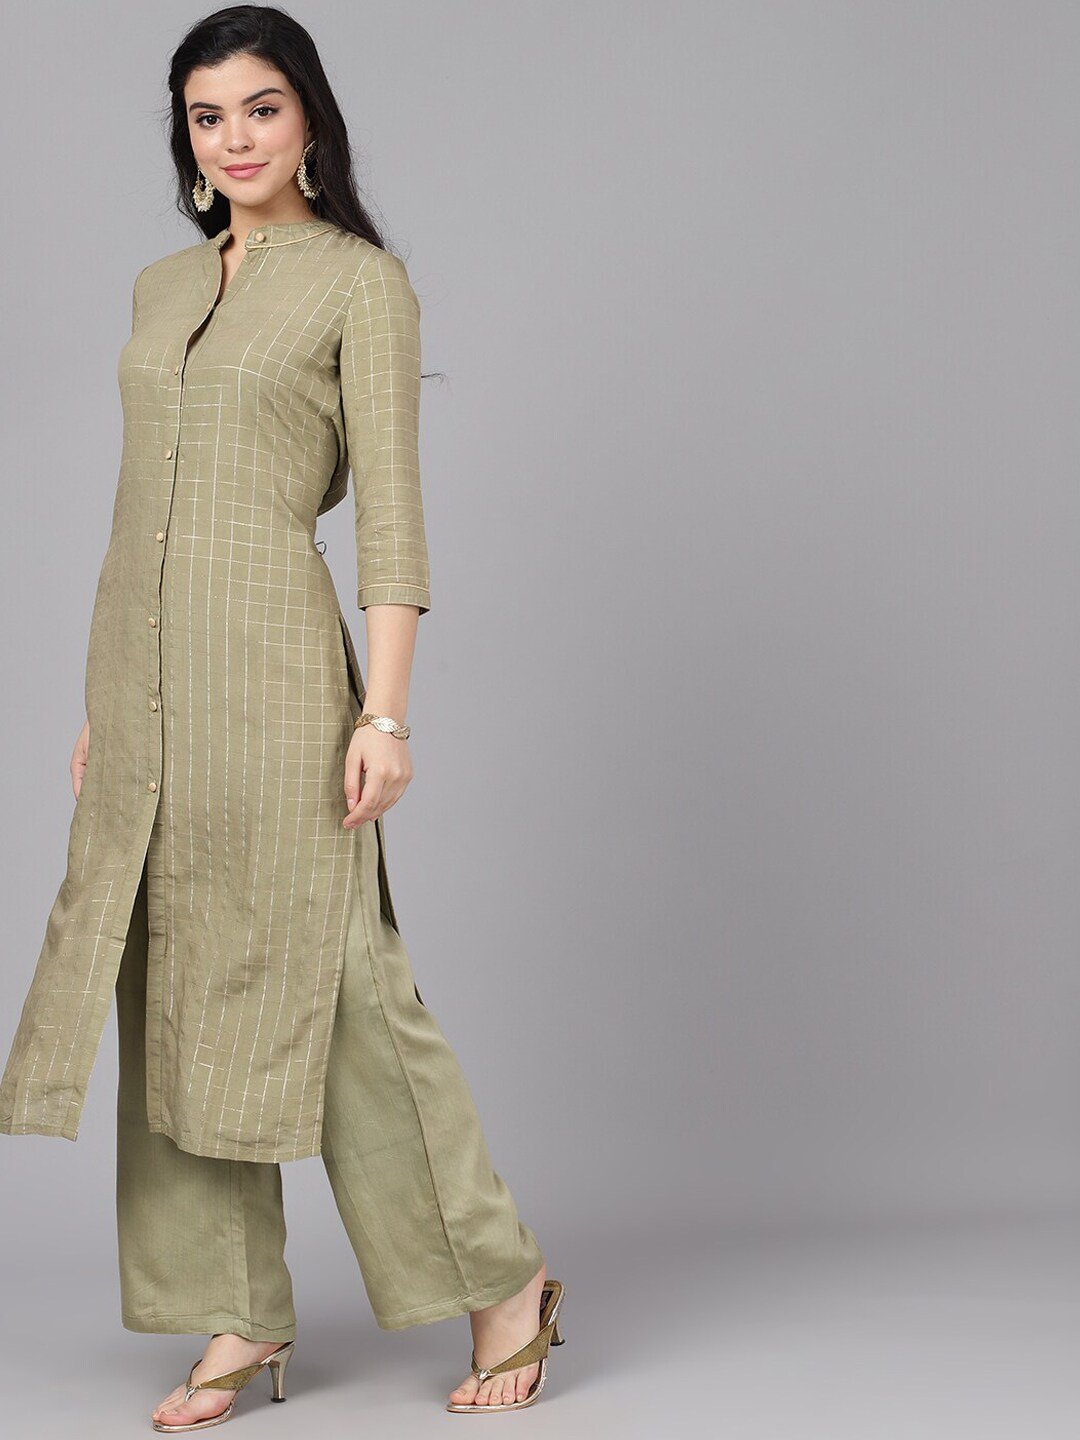 Women's  Olive Green & Gold-Coloured Printed Kurti with Palazzos - AKS